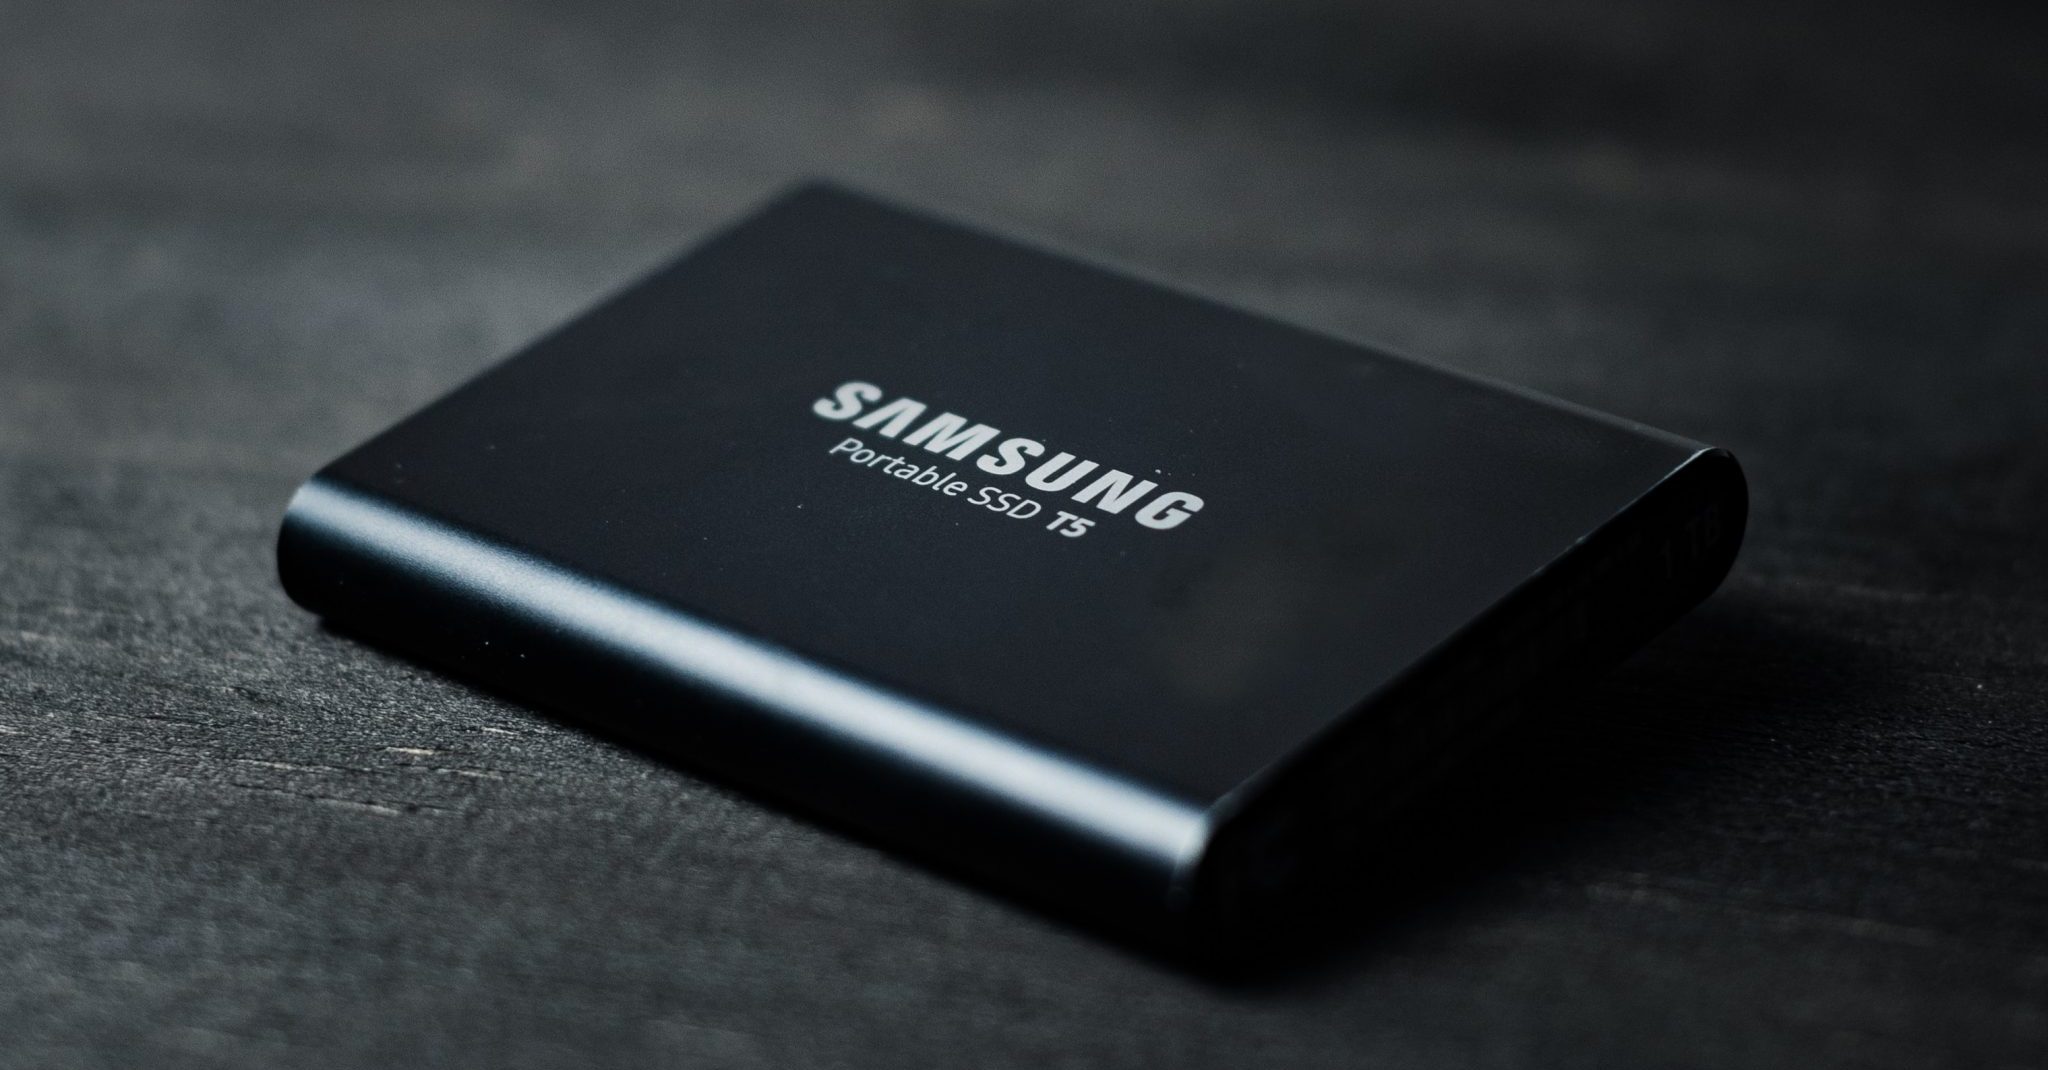 Samsung Offers 2TB SSD for Consumers